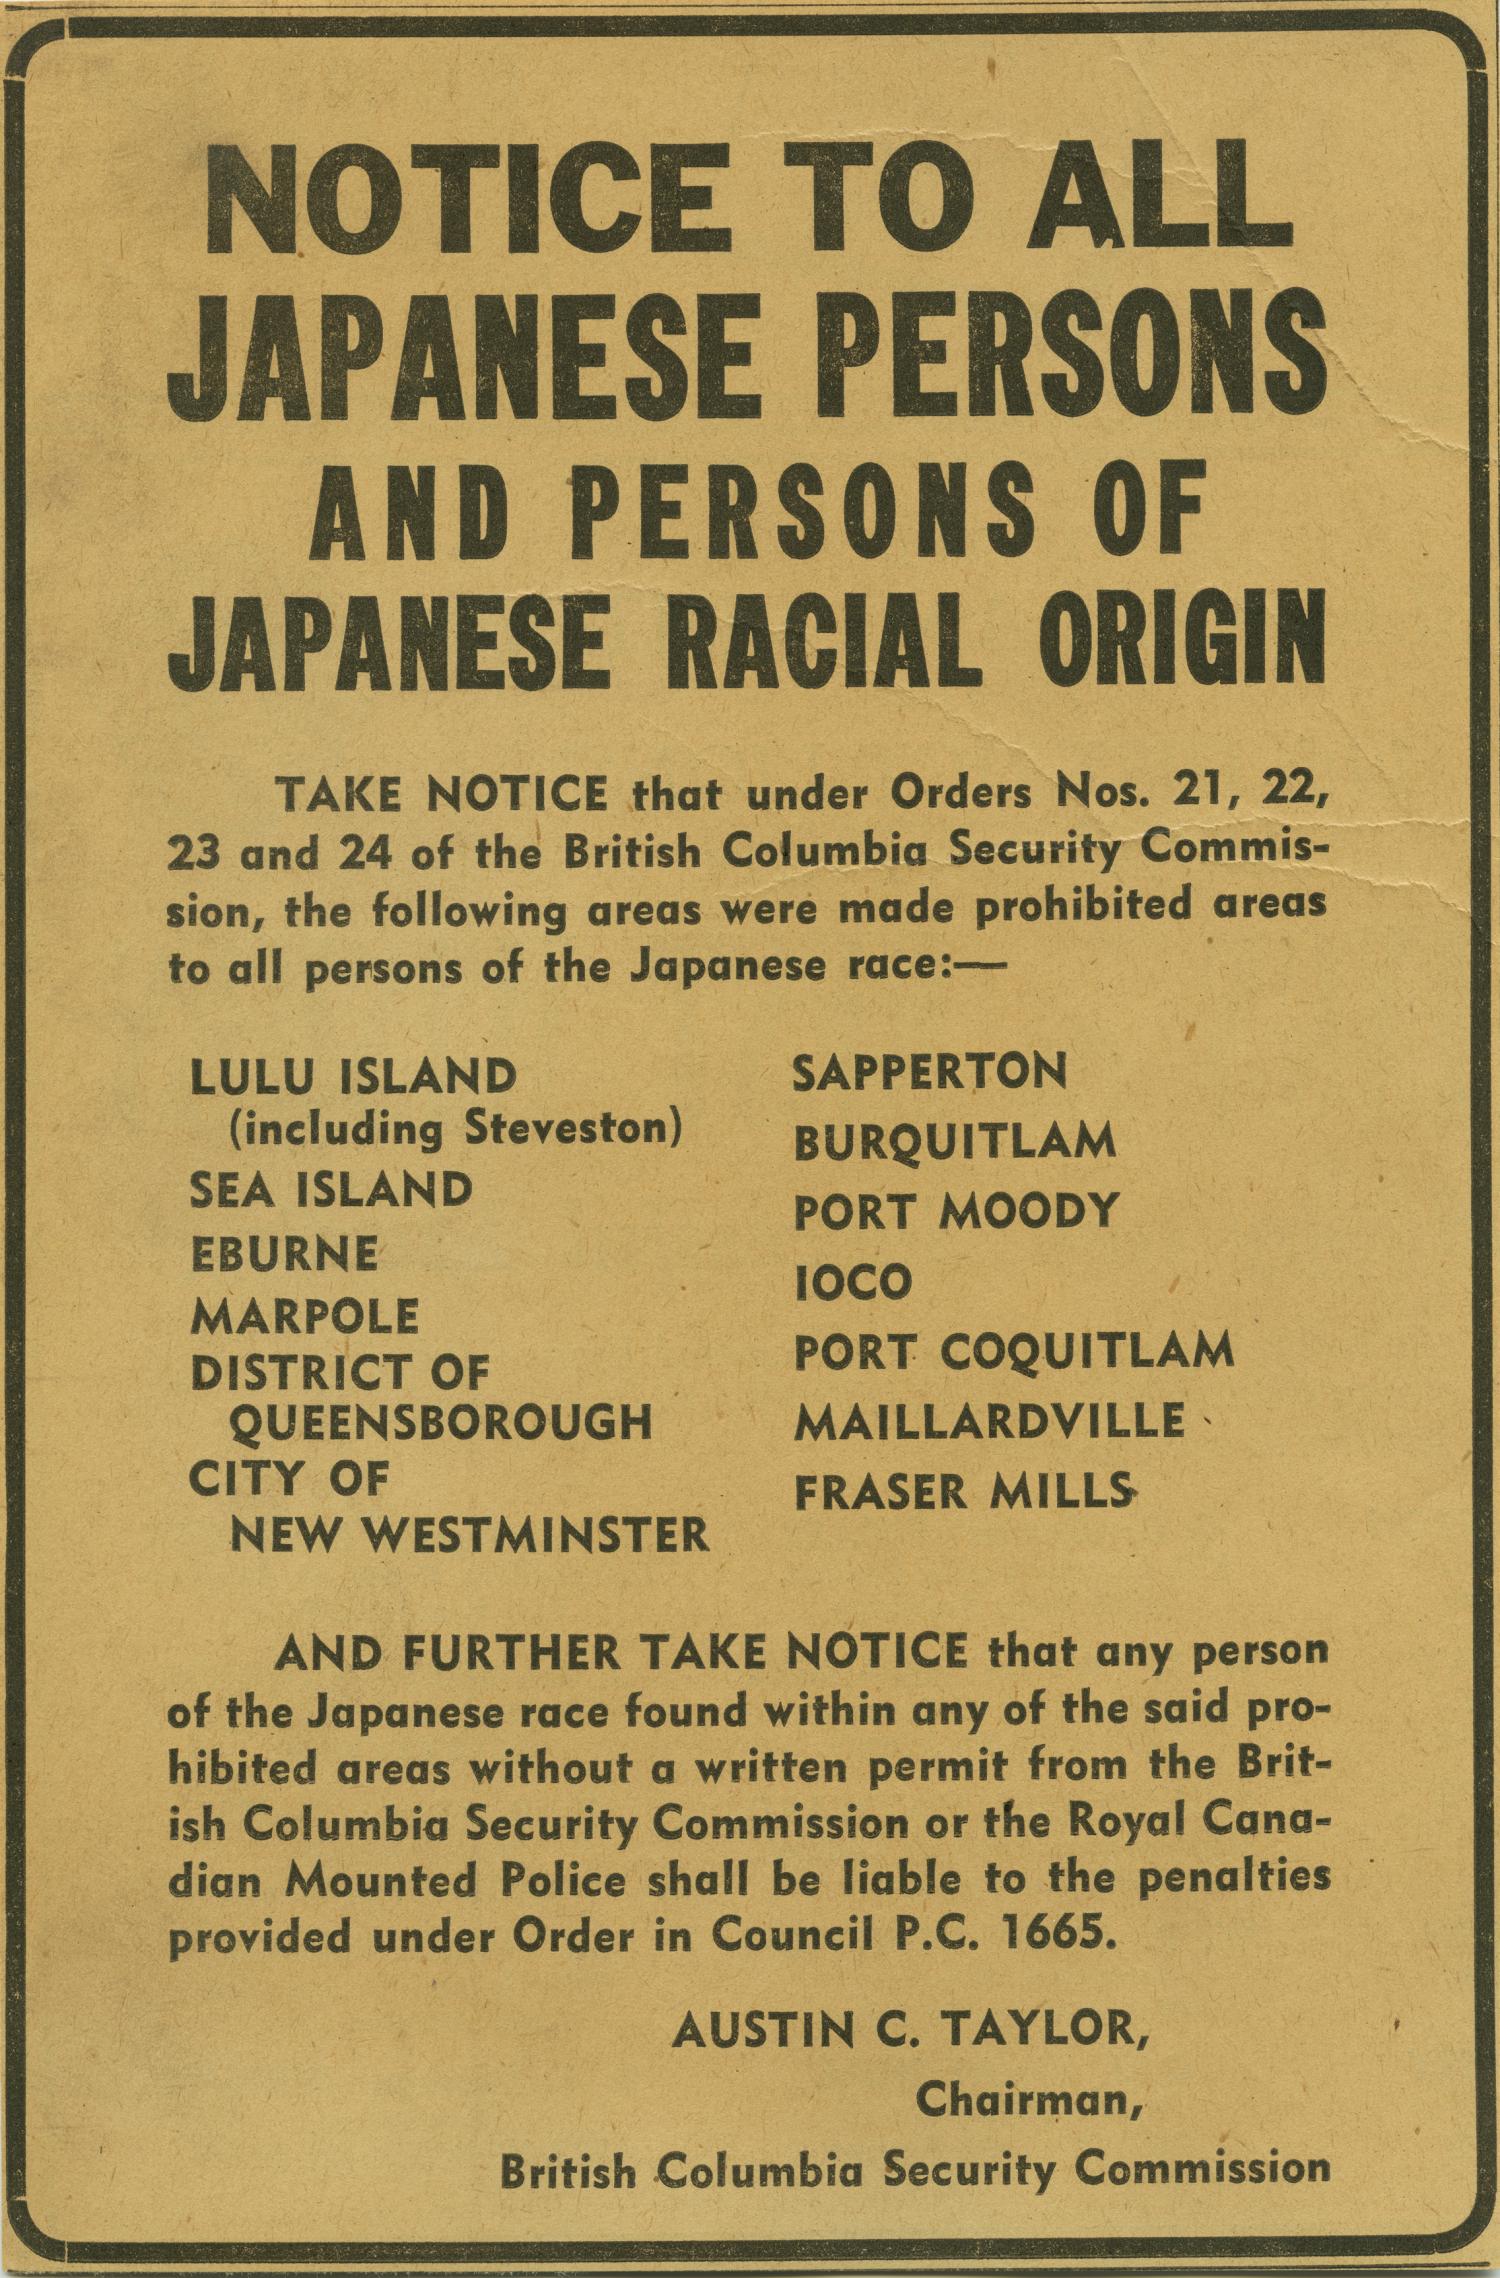 A newspaper notice for Japanese Canadian relocation from the B.C. Coast